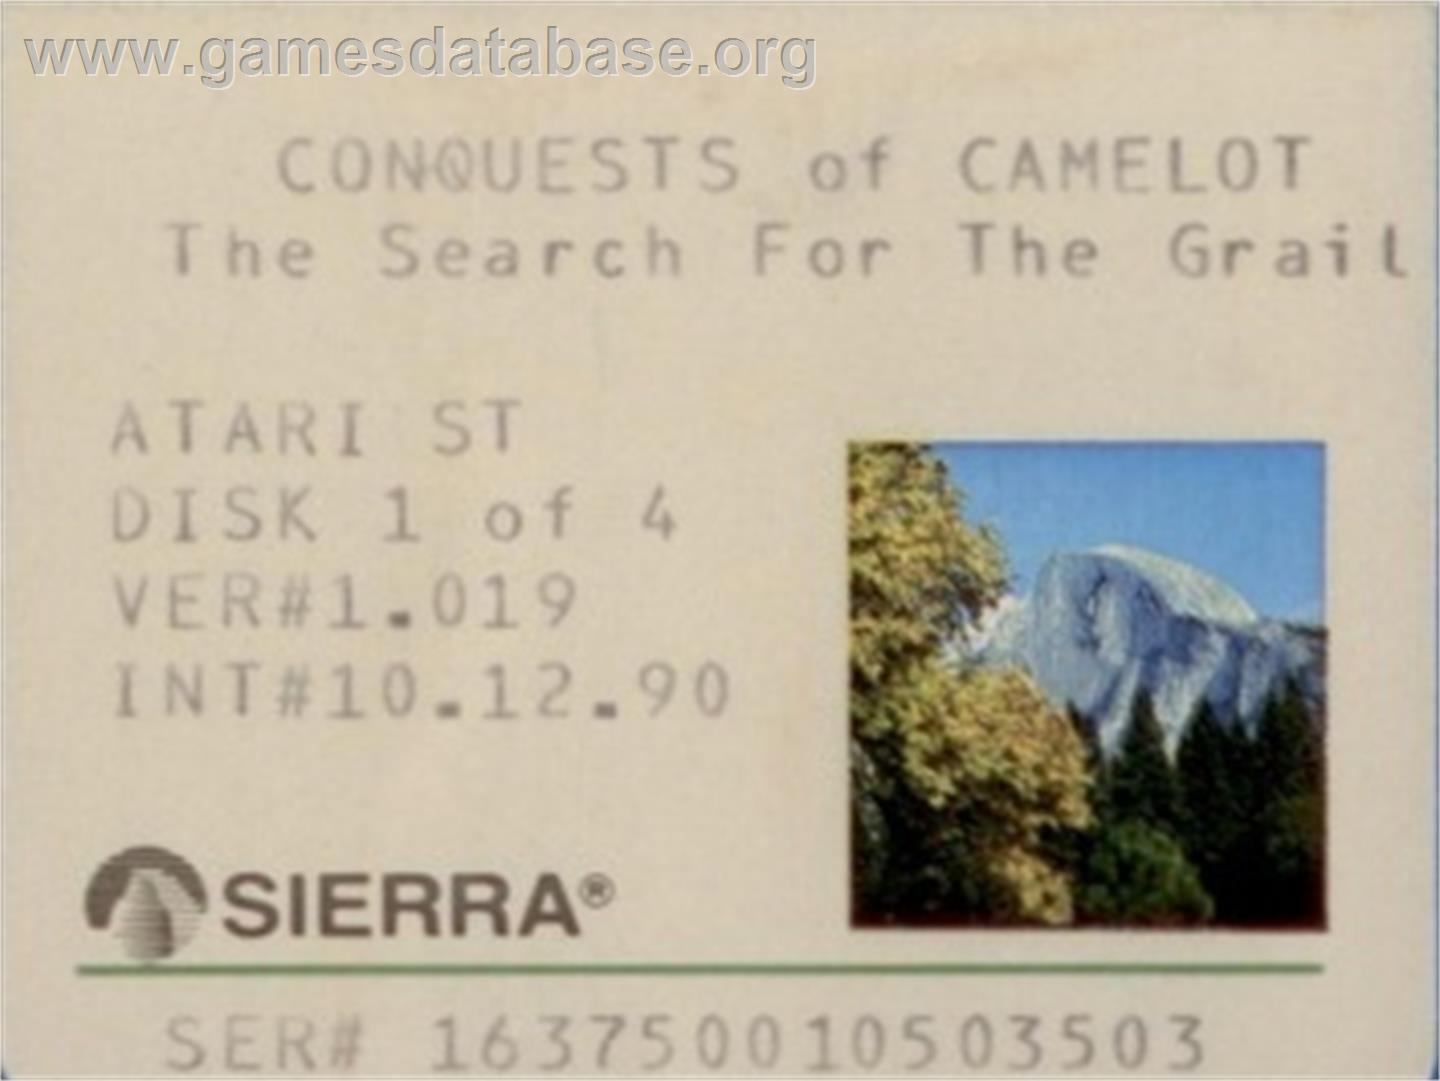 Conquests of Camelot: The Search for the Grail - Atari ST - Artwork - Cartridge Top